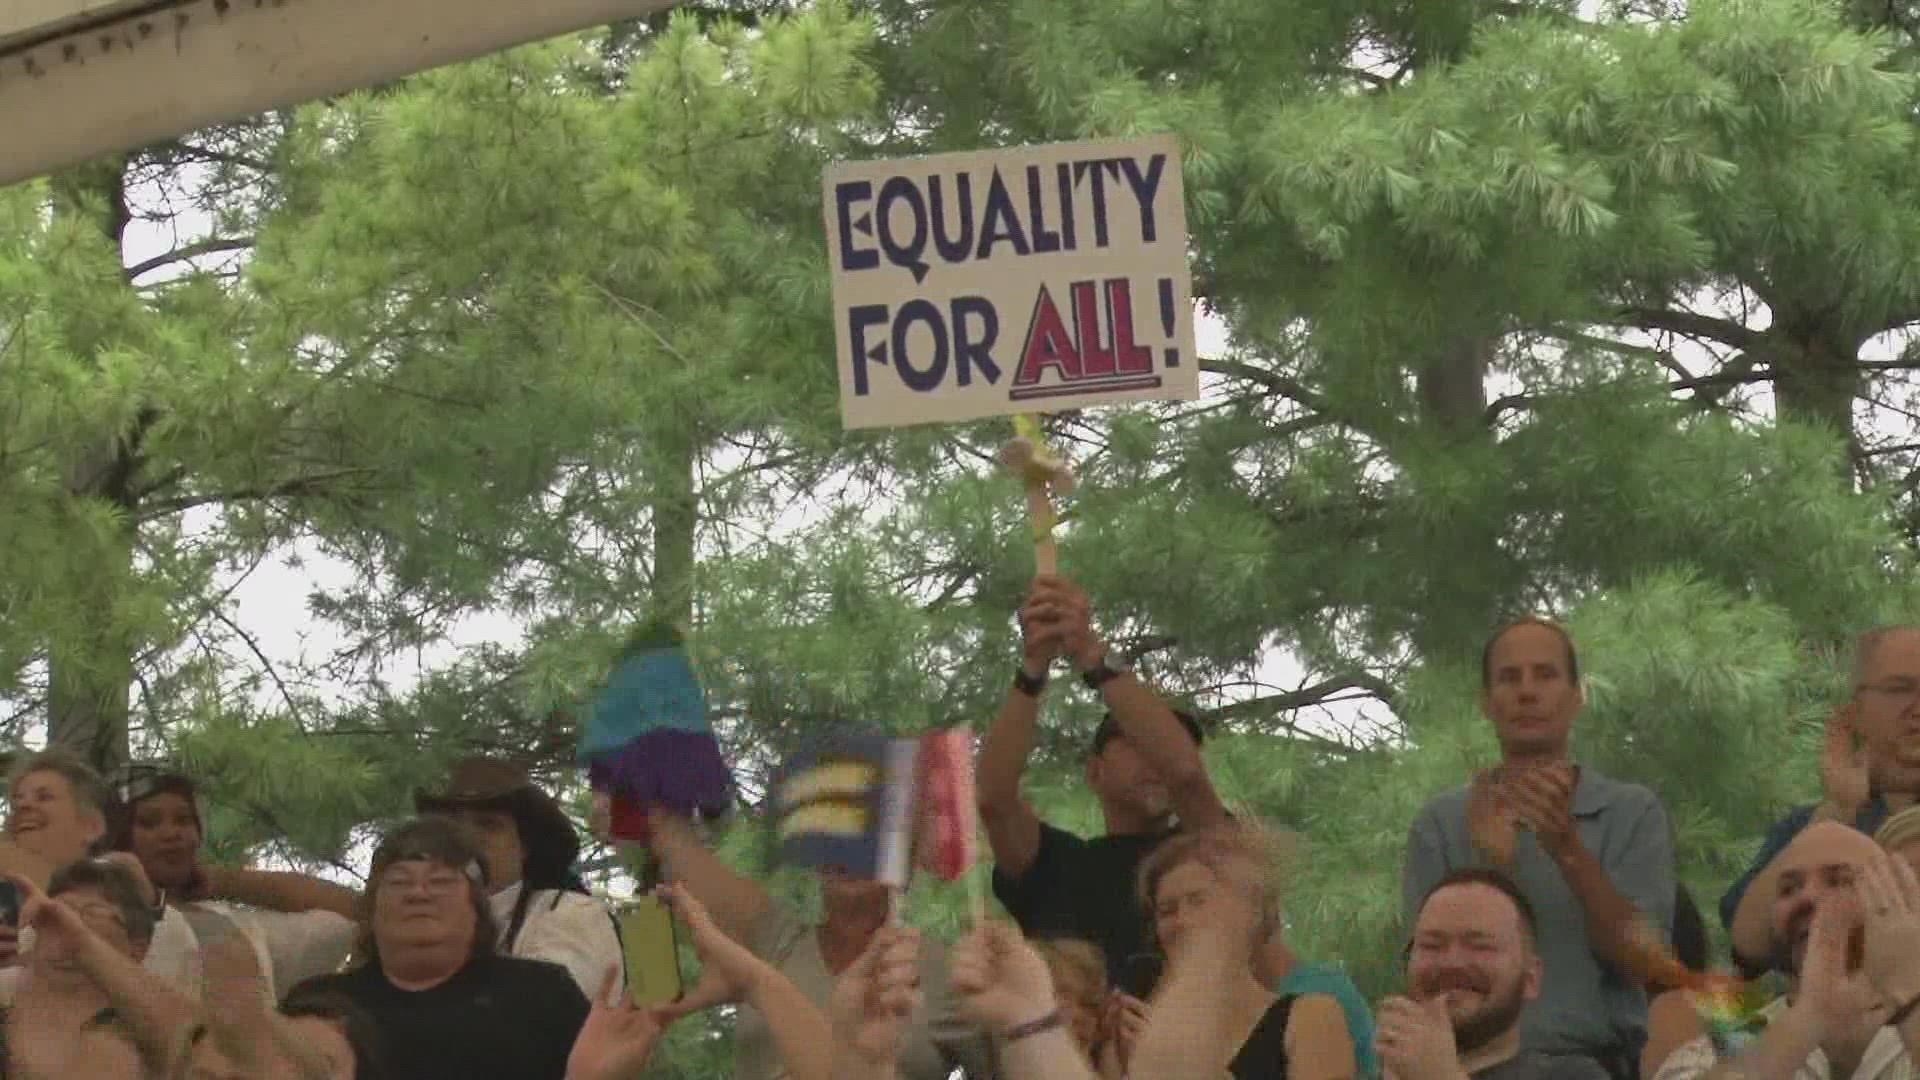 Supporters of the act said it serves as an added layer of protection for same-sex and interracial marriages.